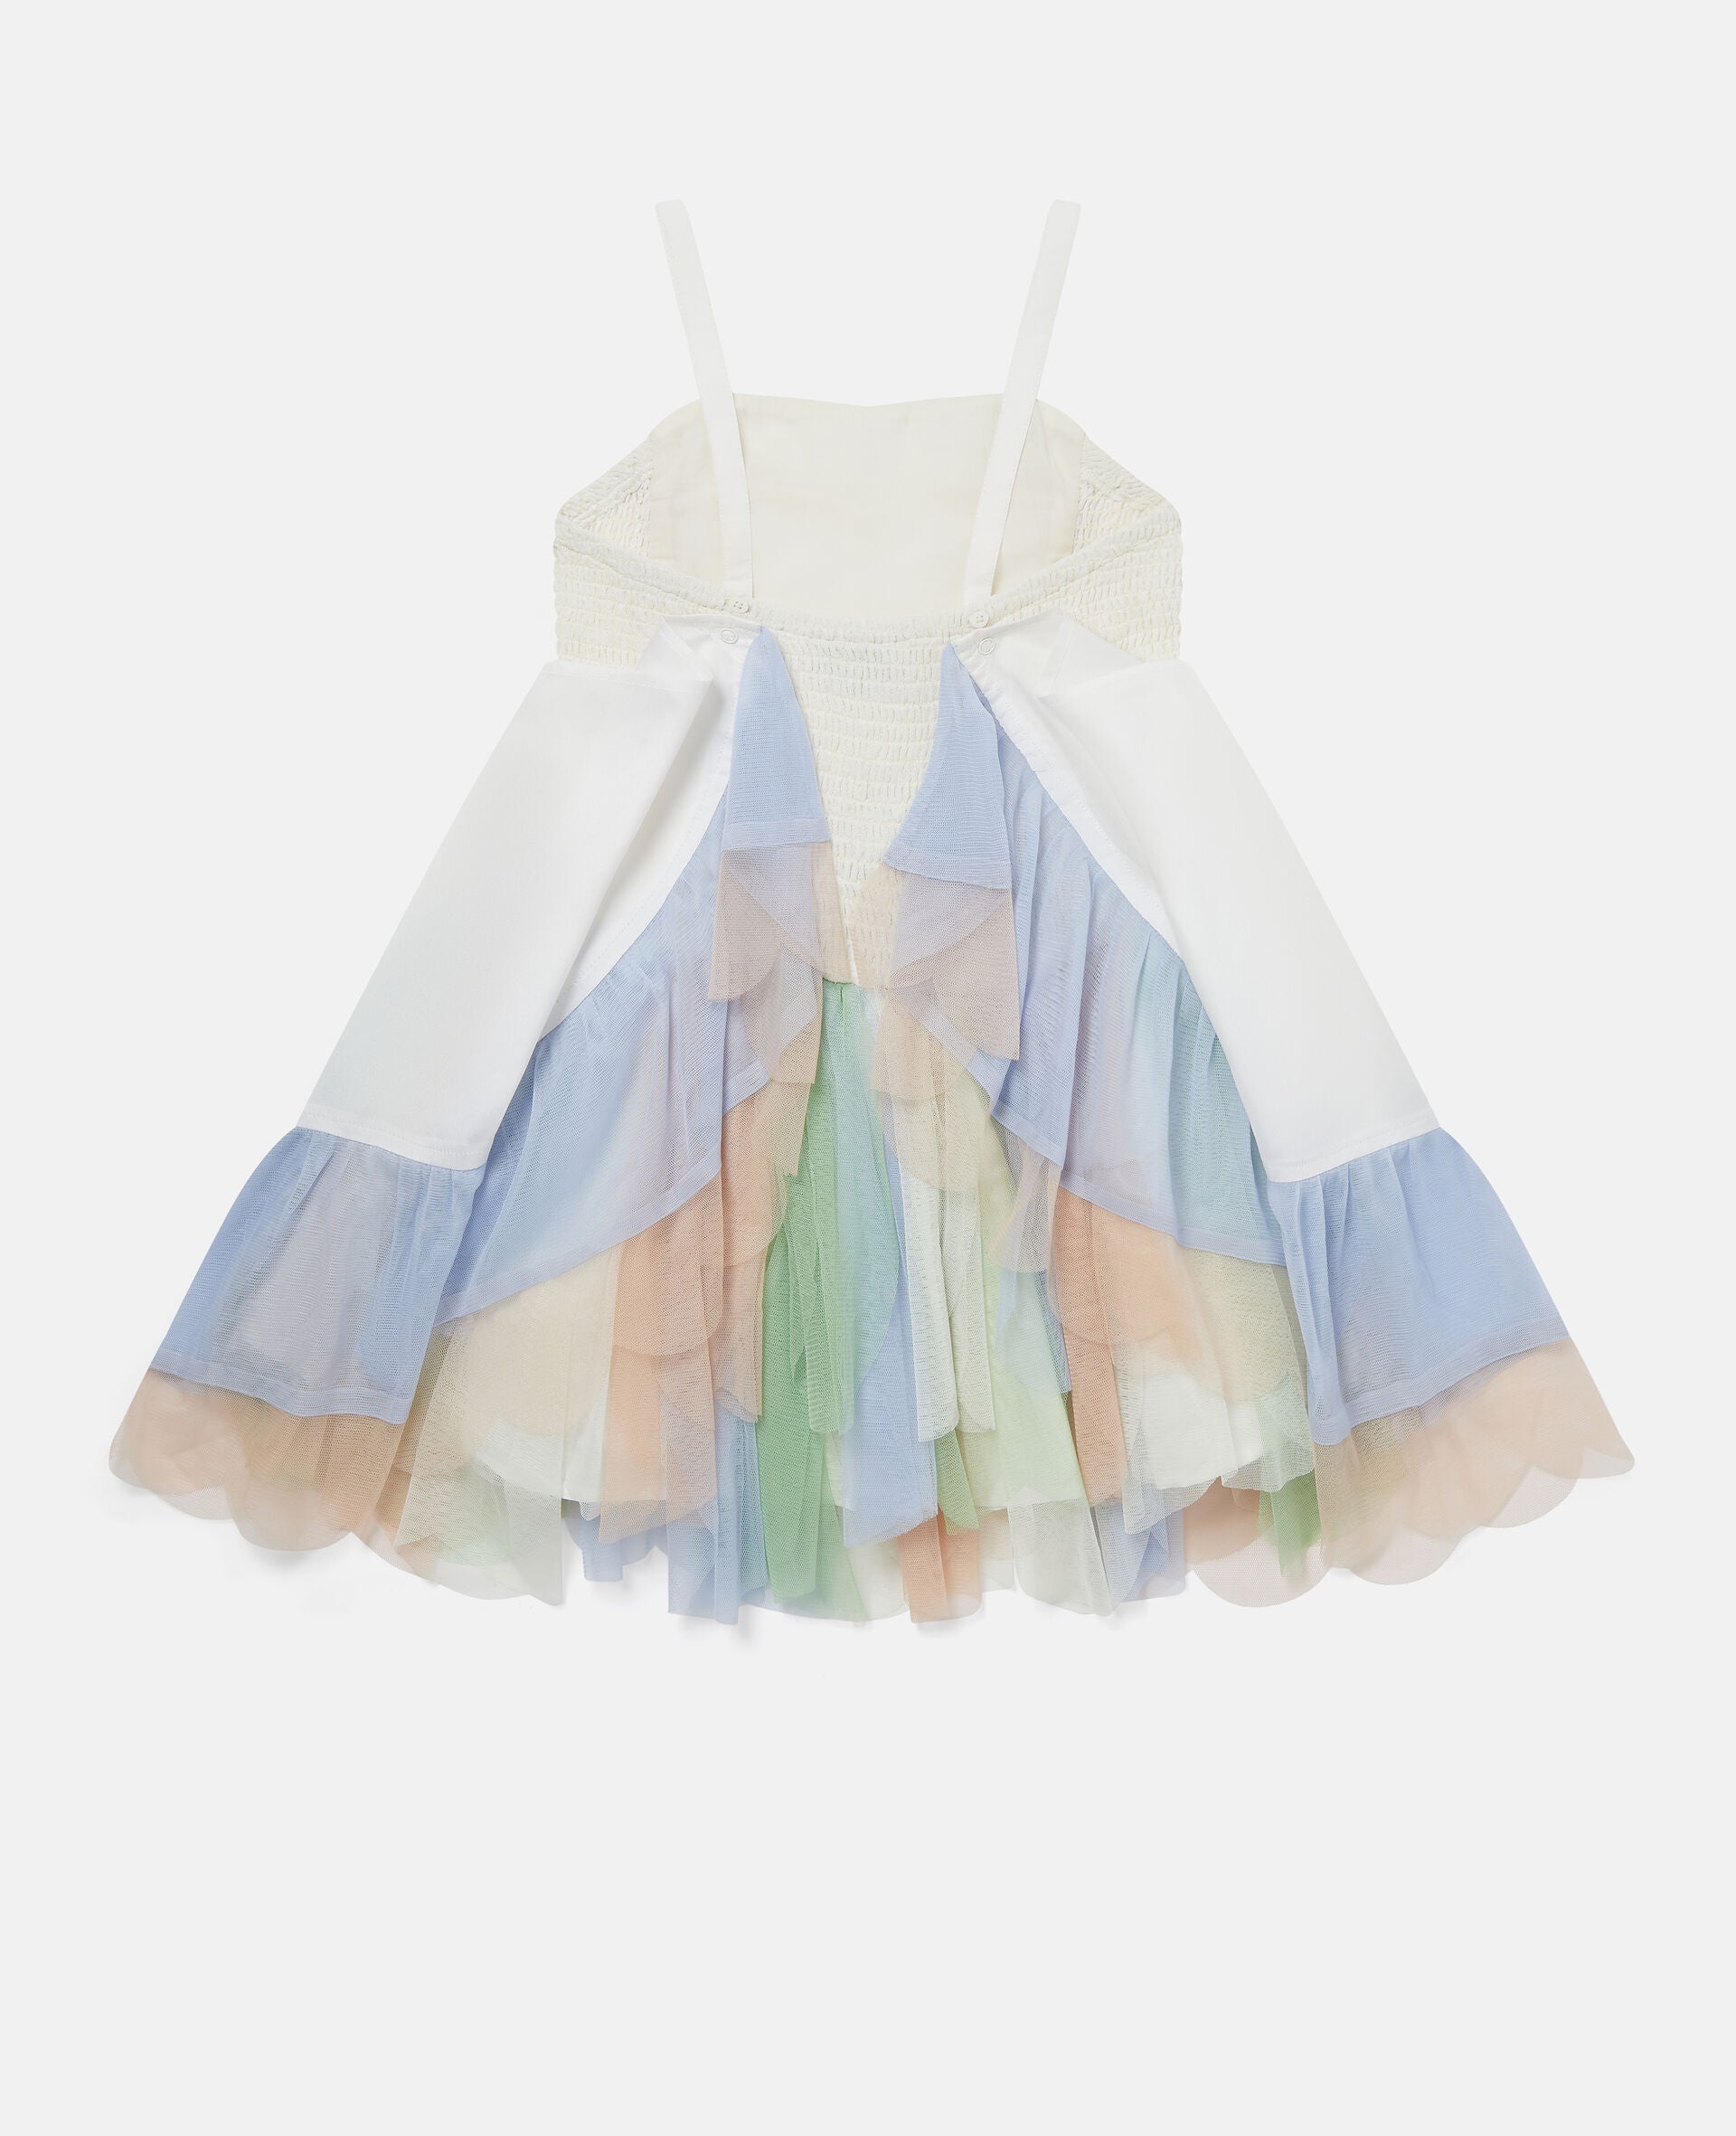 Stella Mccartney Tull Dress with multicolor skirt layers and wings